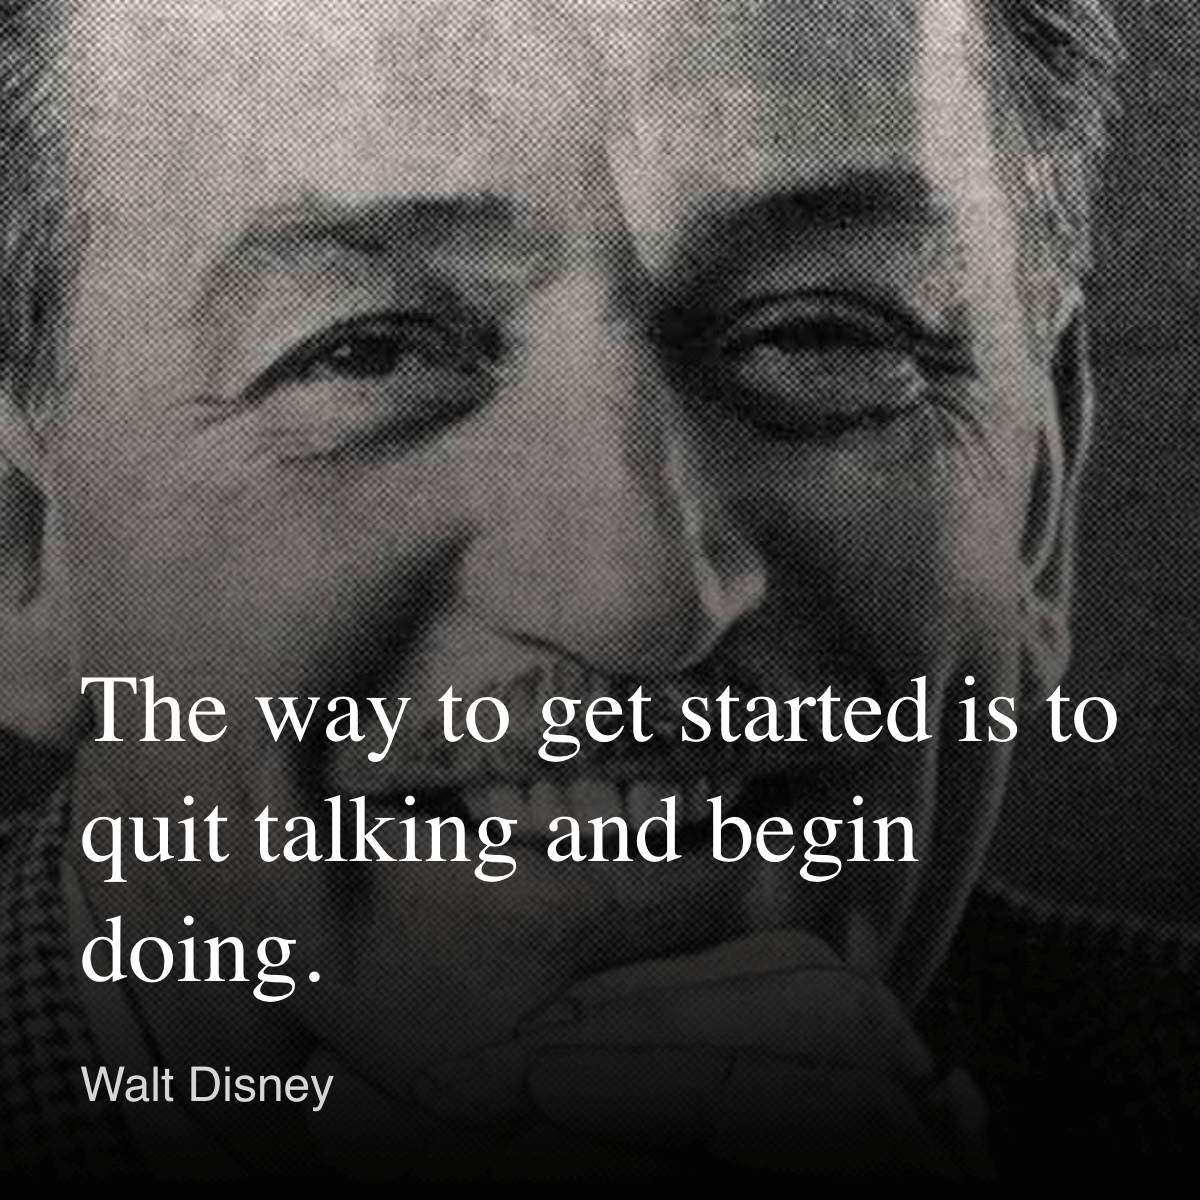 The way to get started is to quit talking and begin doing - Walt Disney